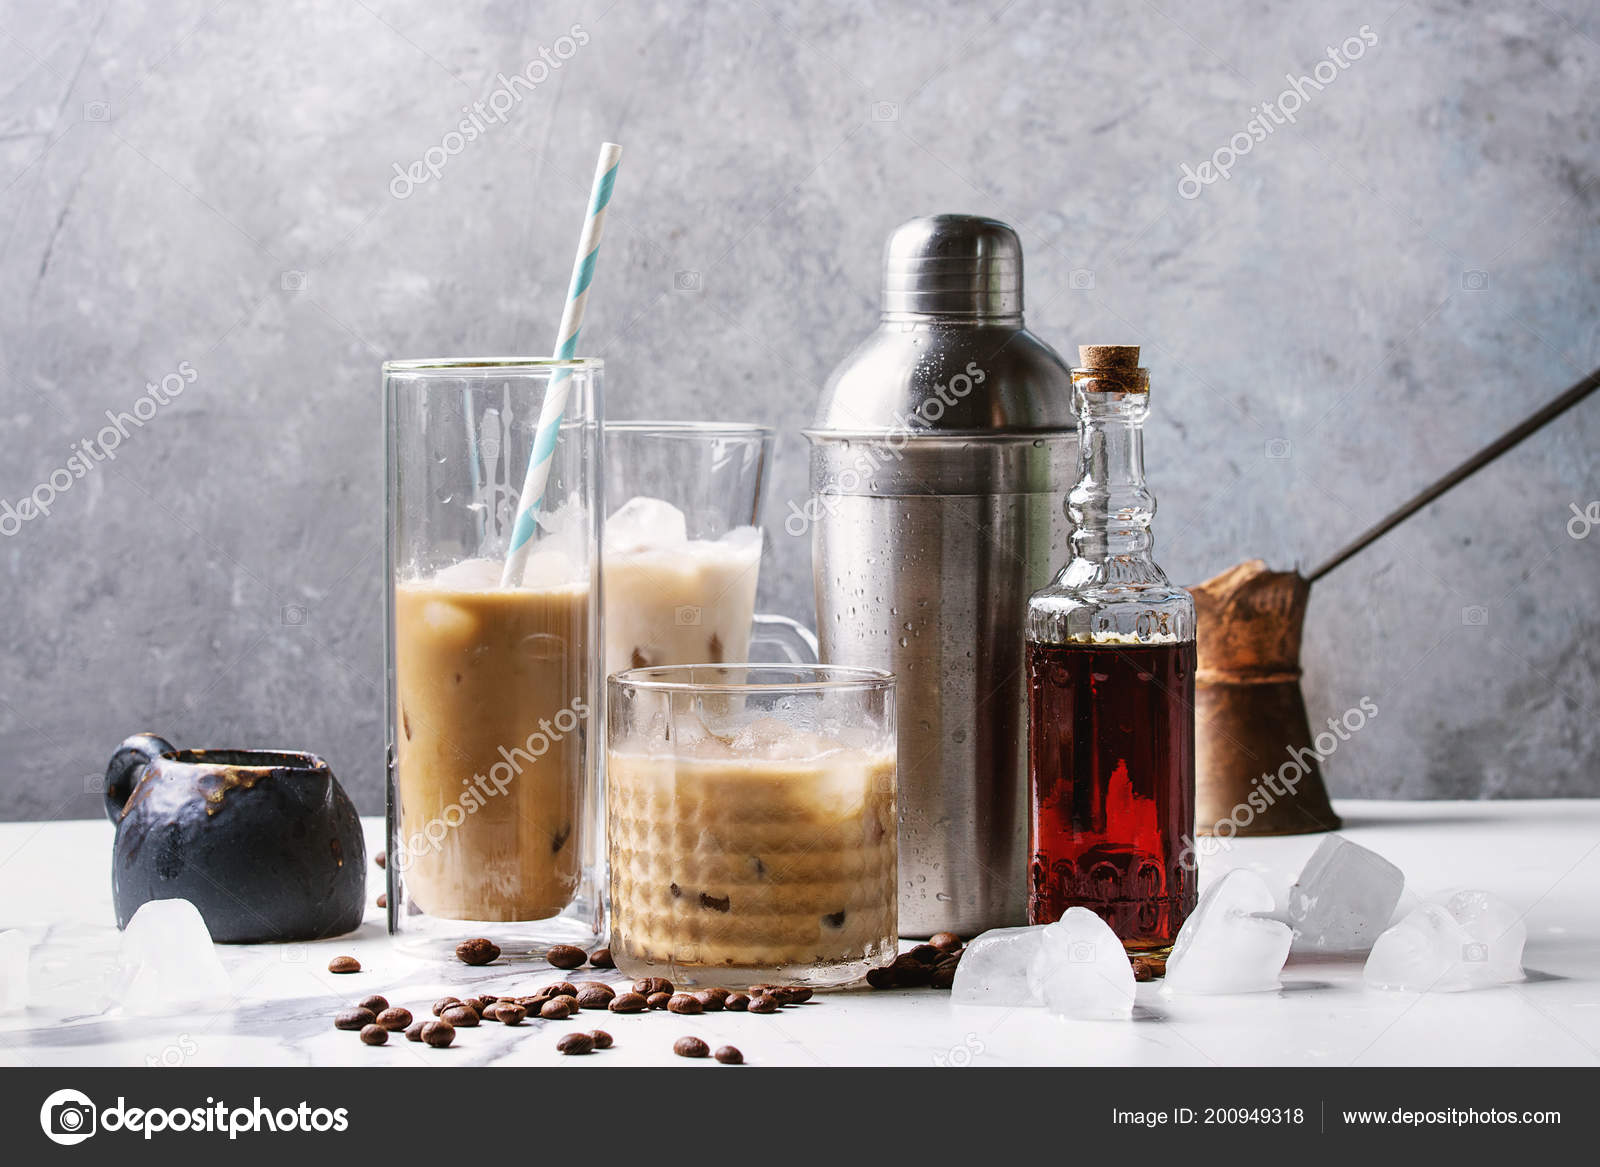 Iced Coffee Cocktail Or Frappe With Ice Cubes And Cream In